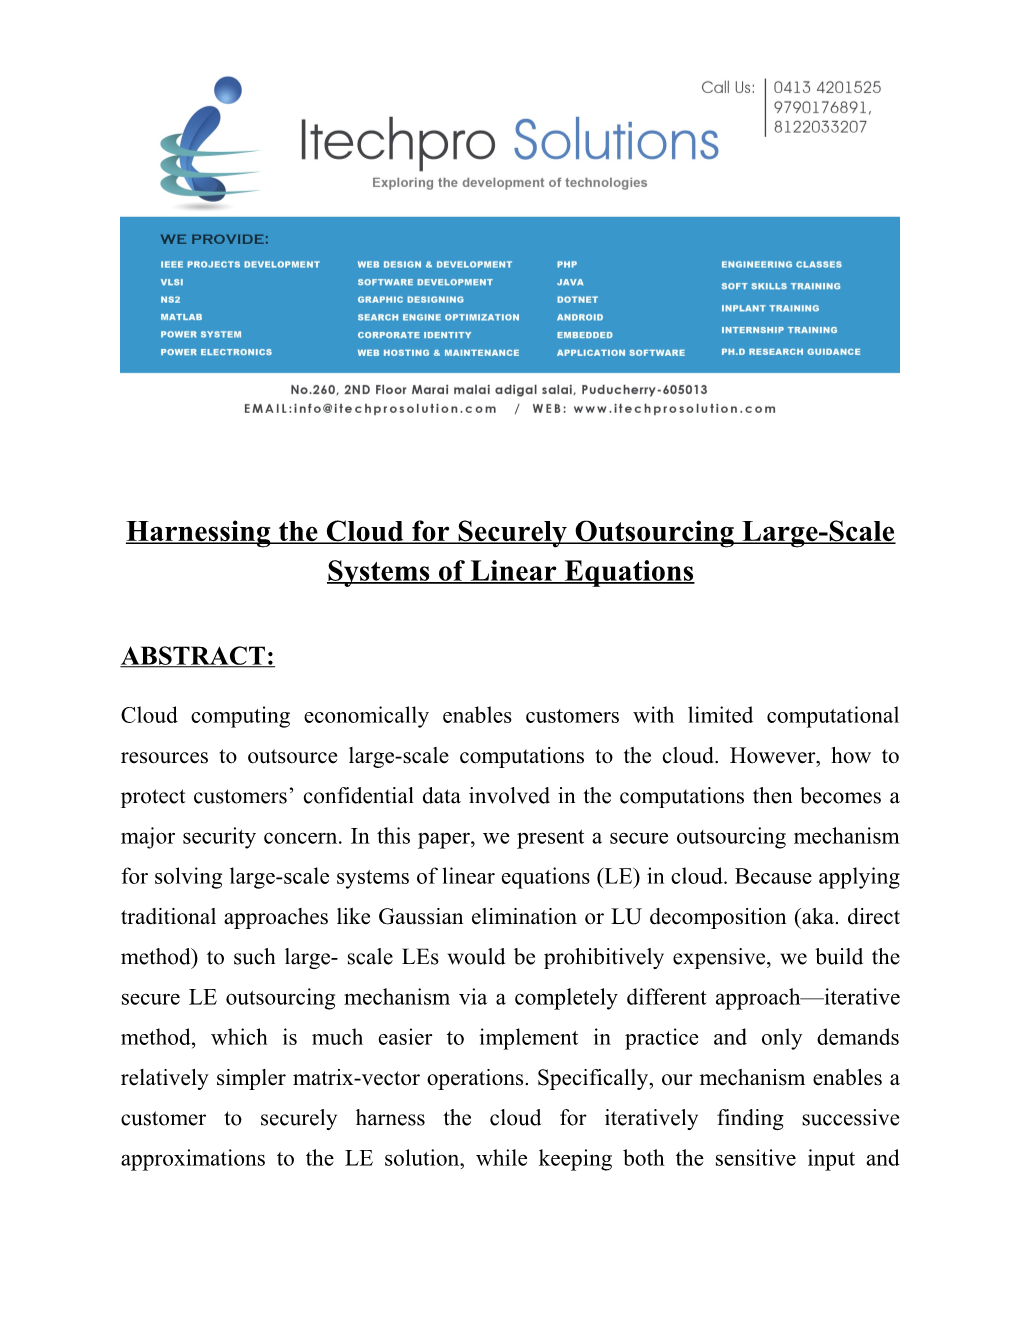 Harnessing the Cloud for Securely Outsourcing Large-Scale Systems of Linear Equations